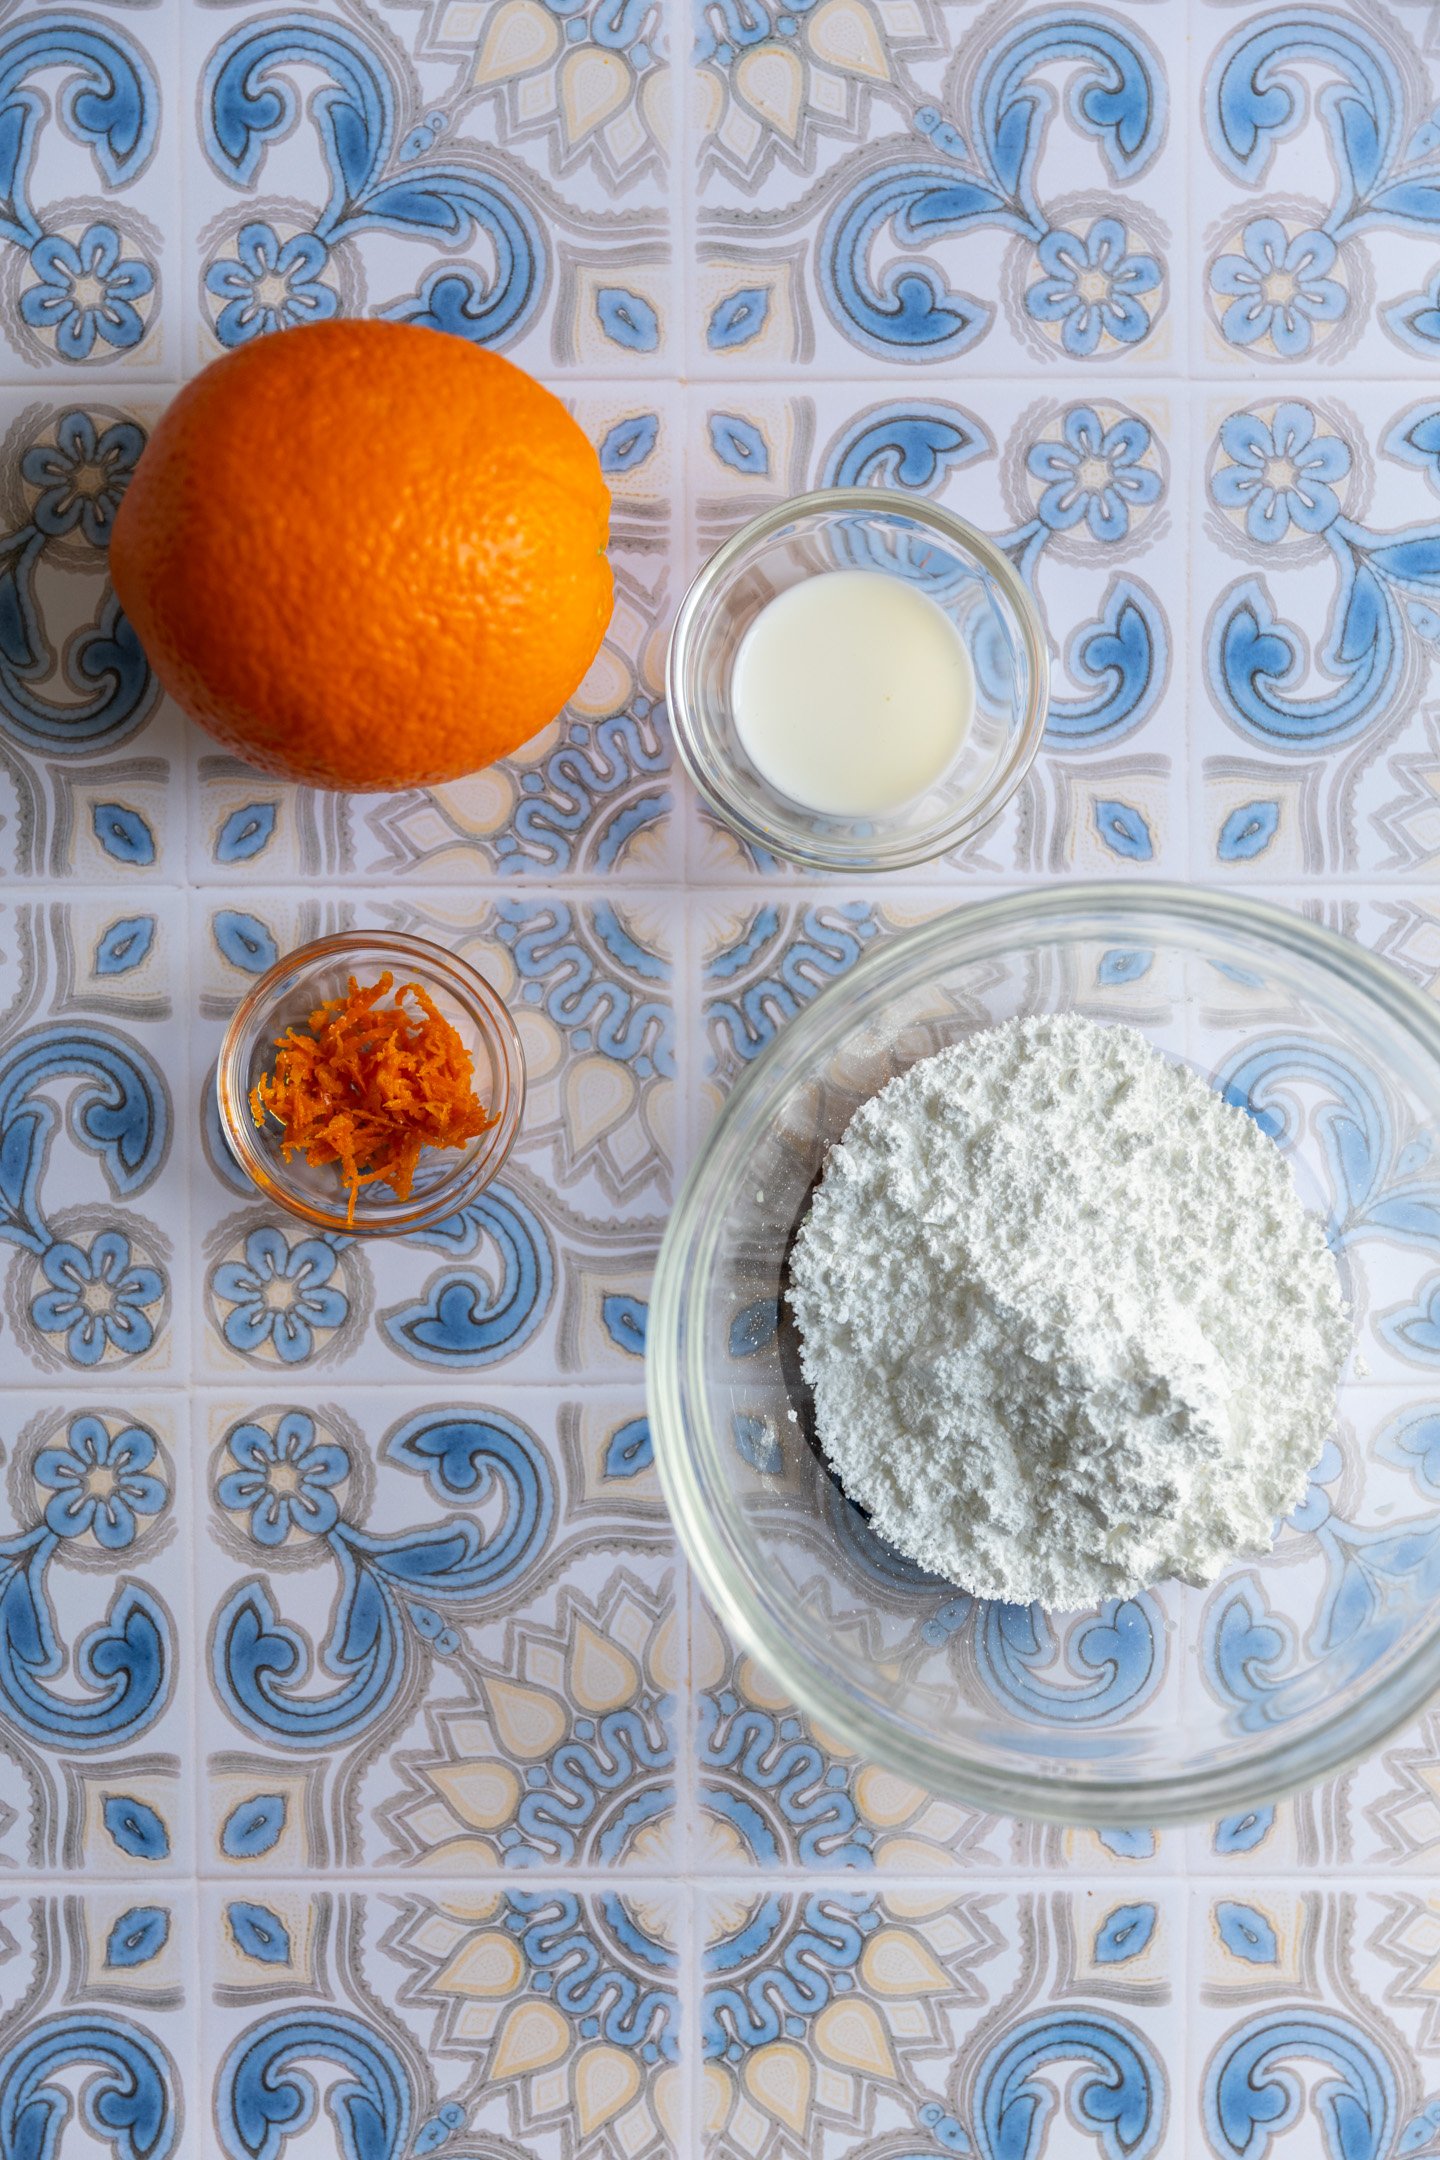 Ingredients for orange icing on a blue decorative surface.